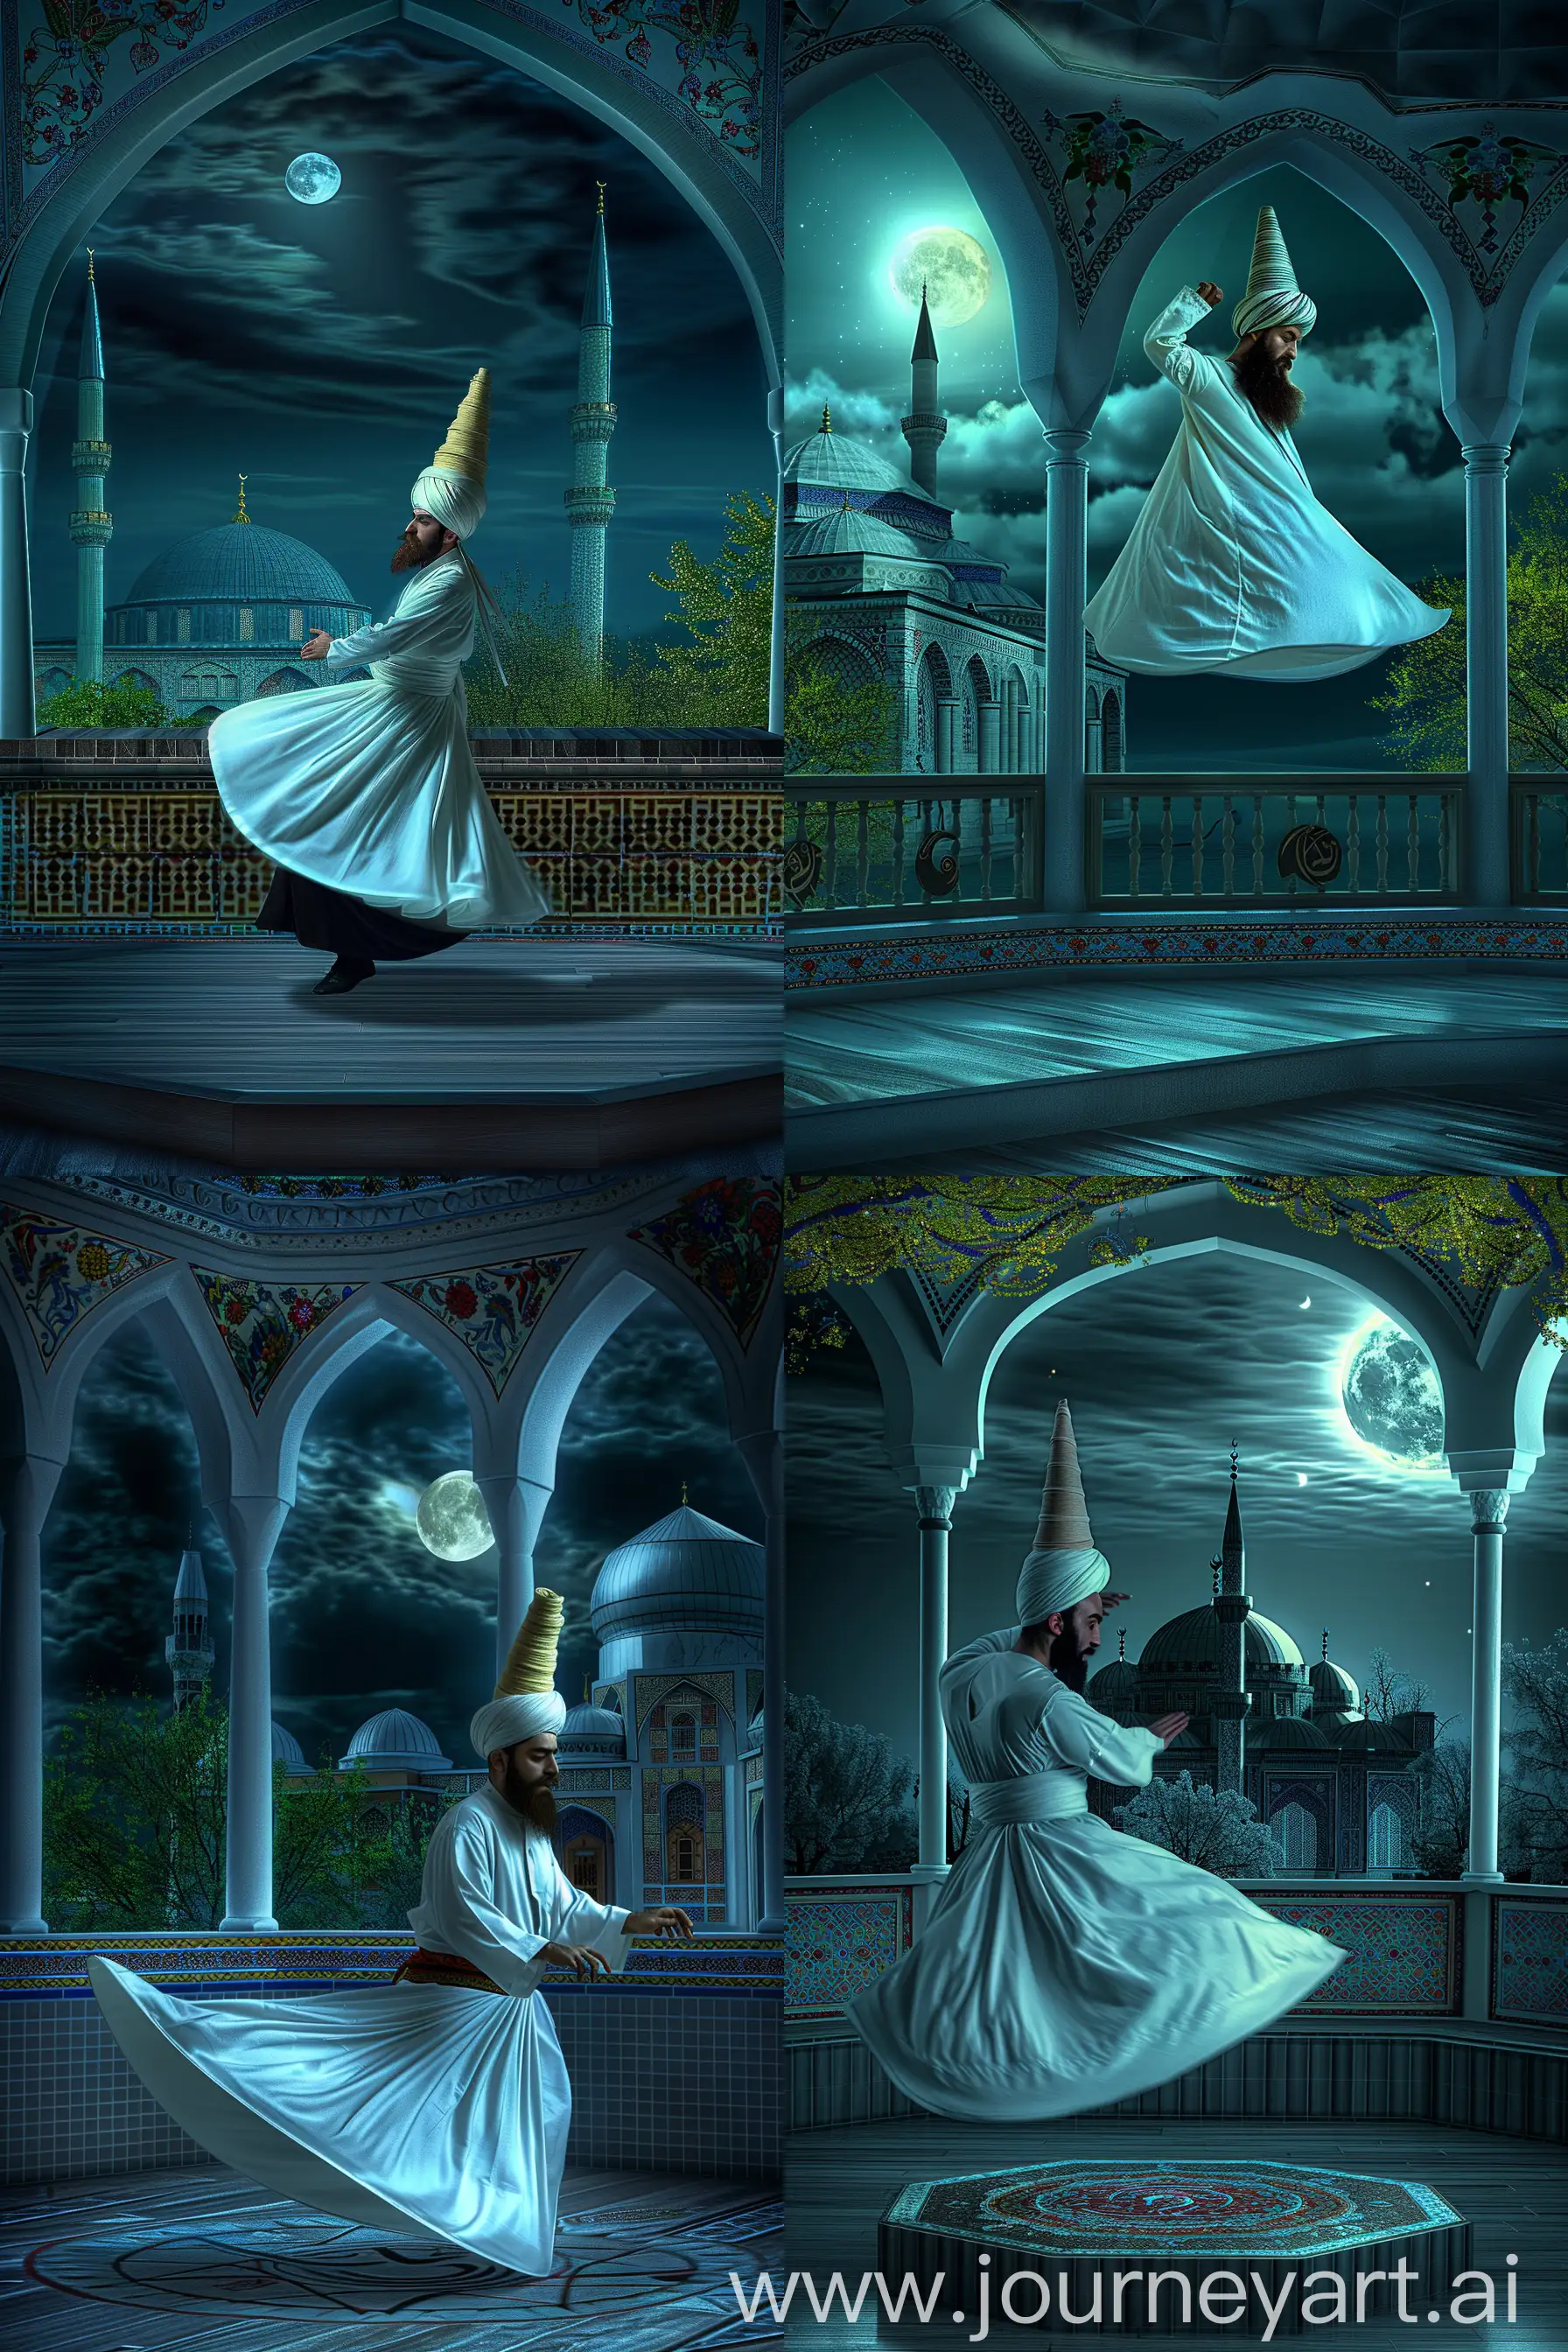 A mesmerizing moment of a blonde bearded Whirling Dervish in mid-spin performing sema, wearing tall fez sikke hat, inside an octagonal balcony having three arches decorated with persian floral motifs, serene night sky with a cresent moon, view of Persian tiled mosque --cref https://shorturl.at/DRt6G --cw 100 --sref https://shorturl.at/f5t49 --sw 1000 --ar 2:3 --v 6 --q 1